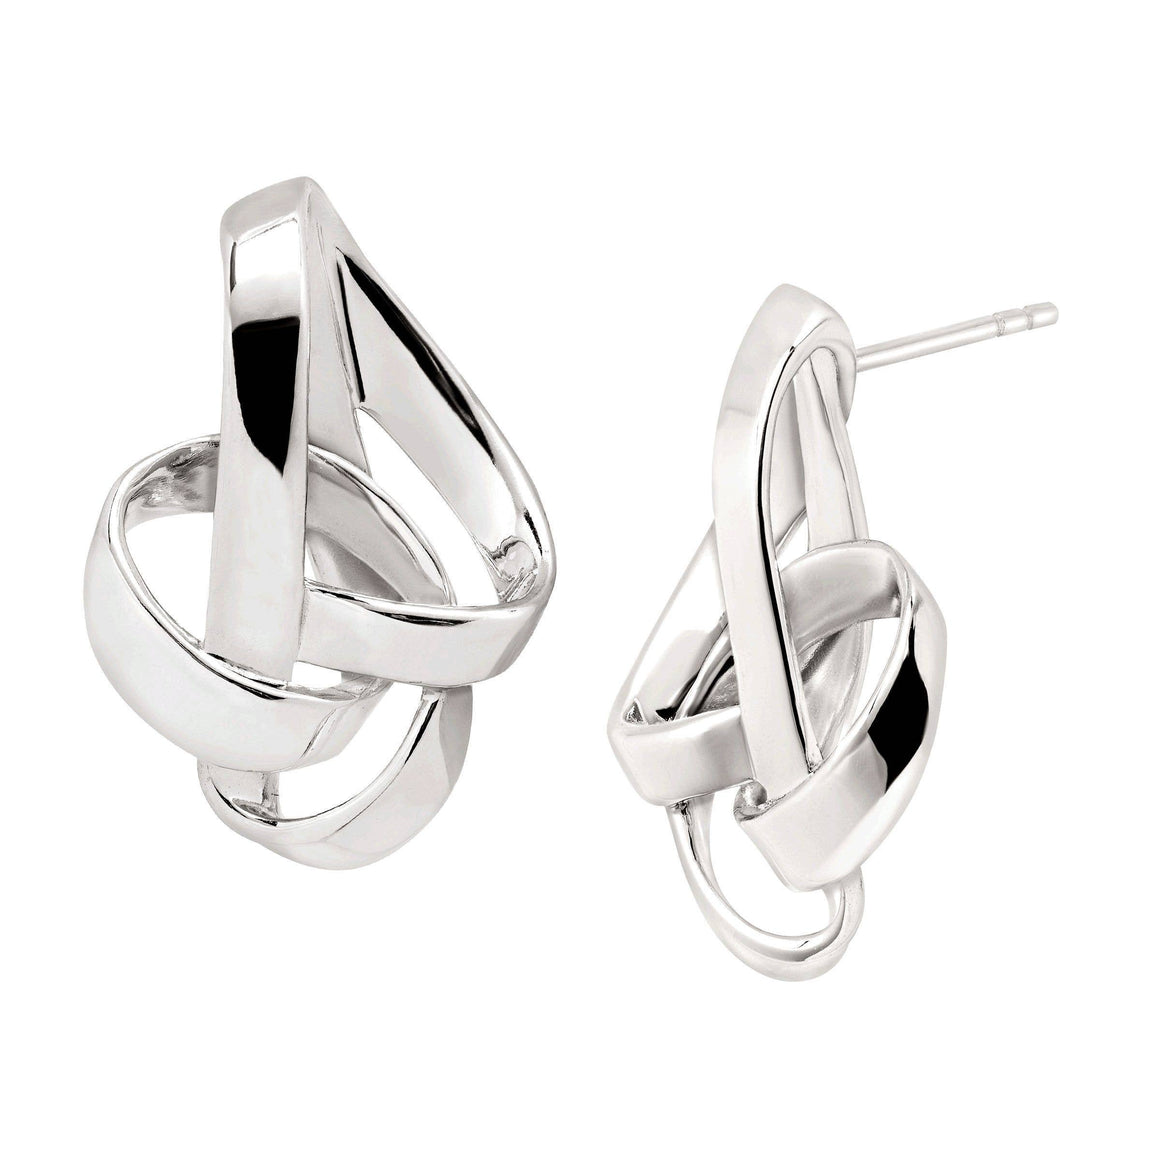 Silpada 'Tied Up' Knotted Earrings in Sterling Silver